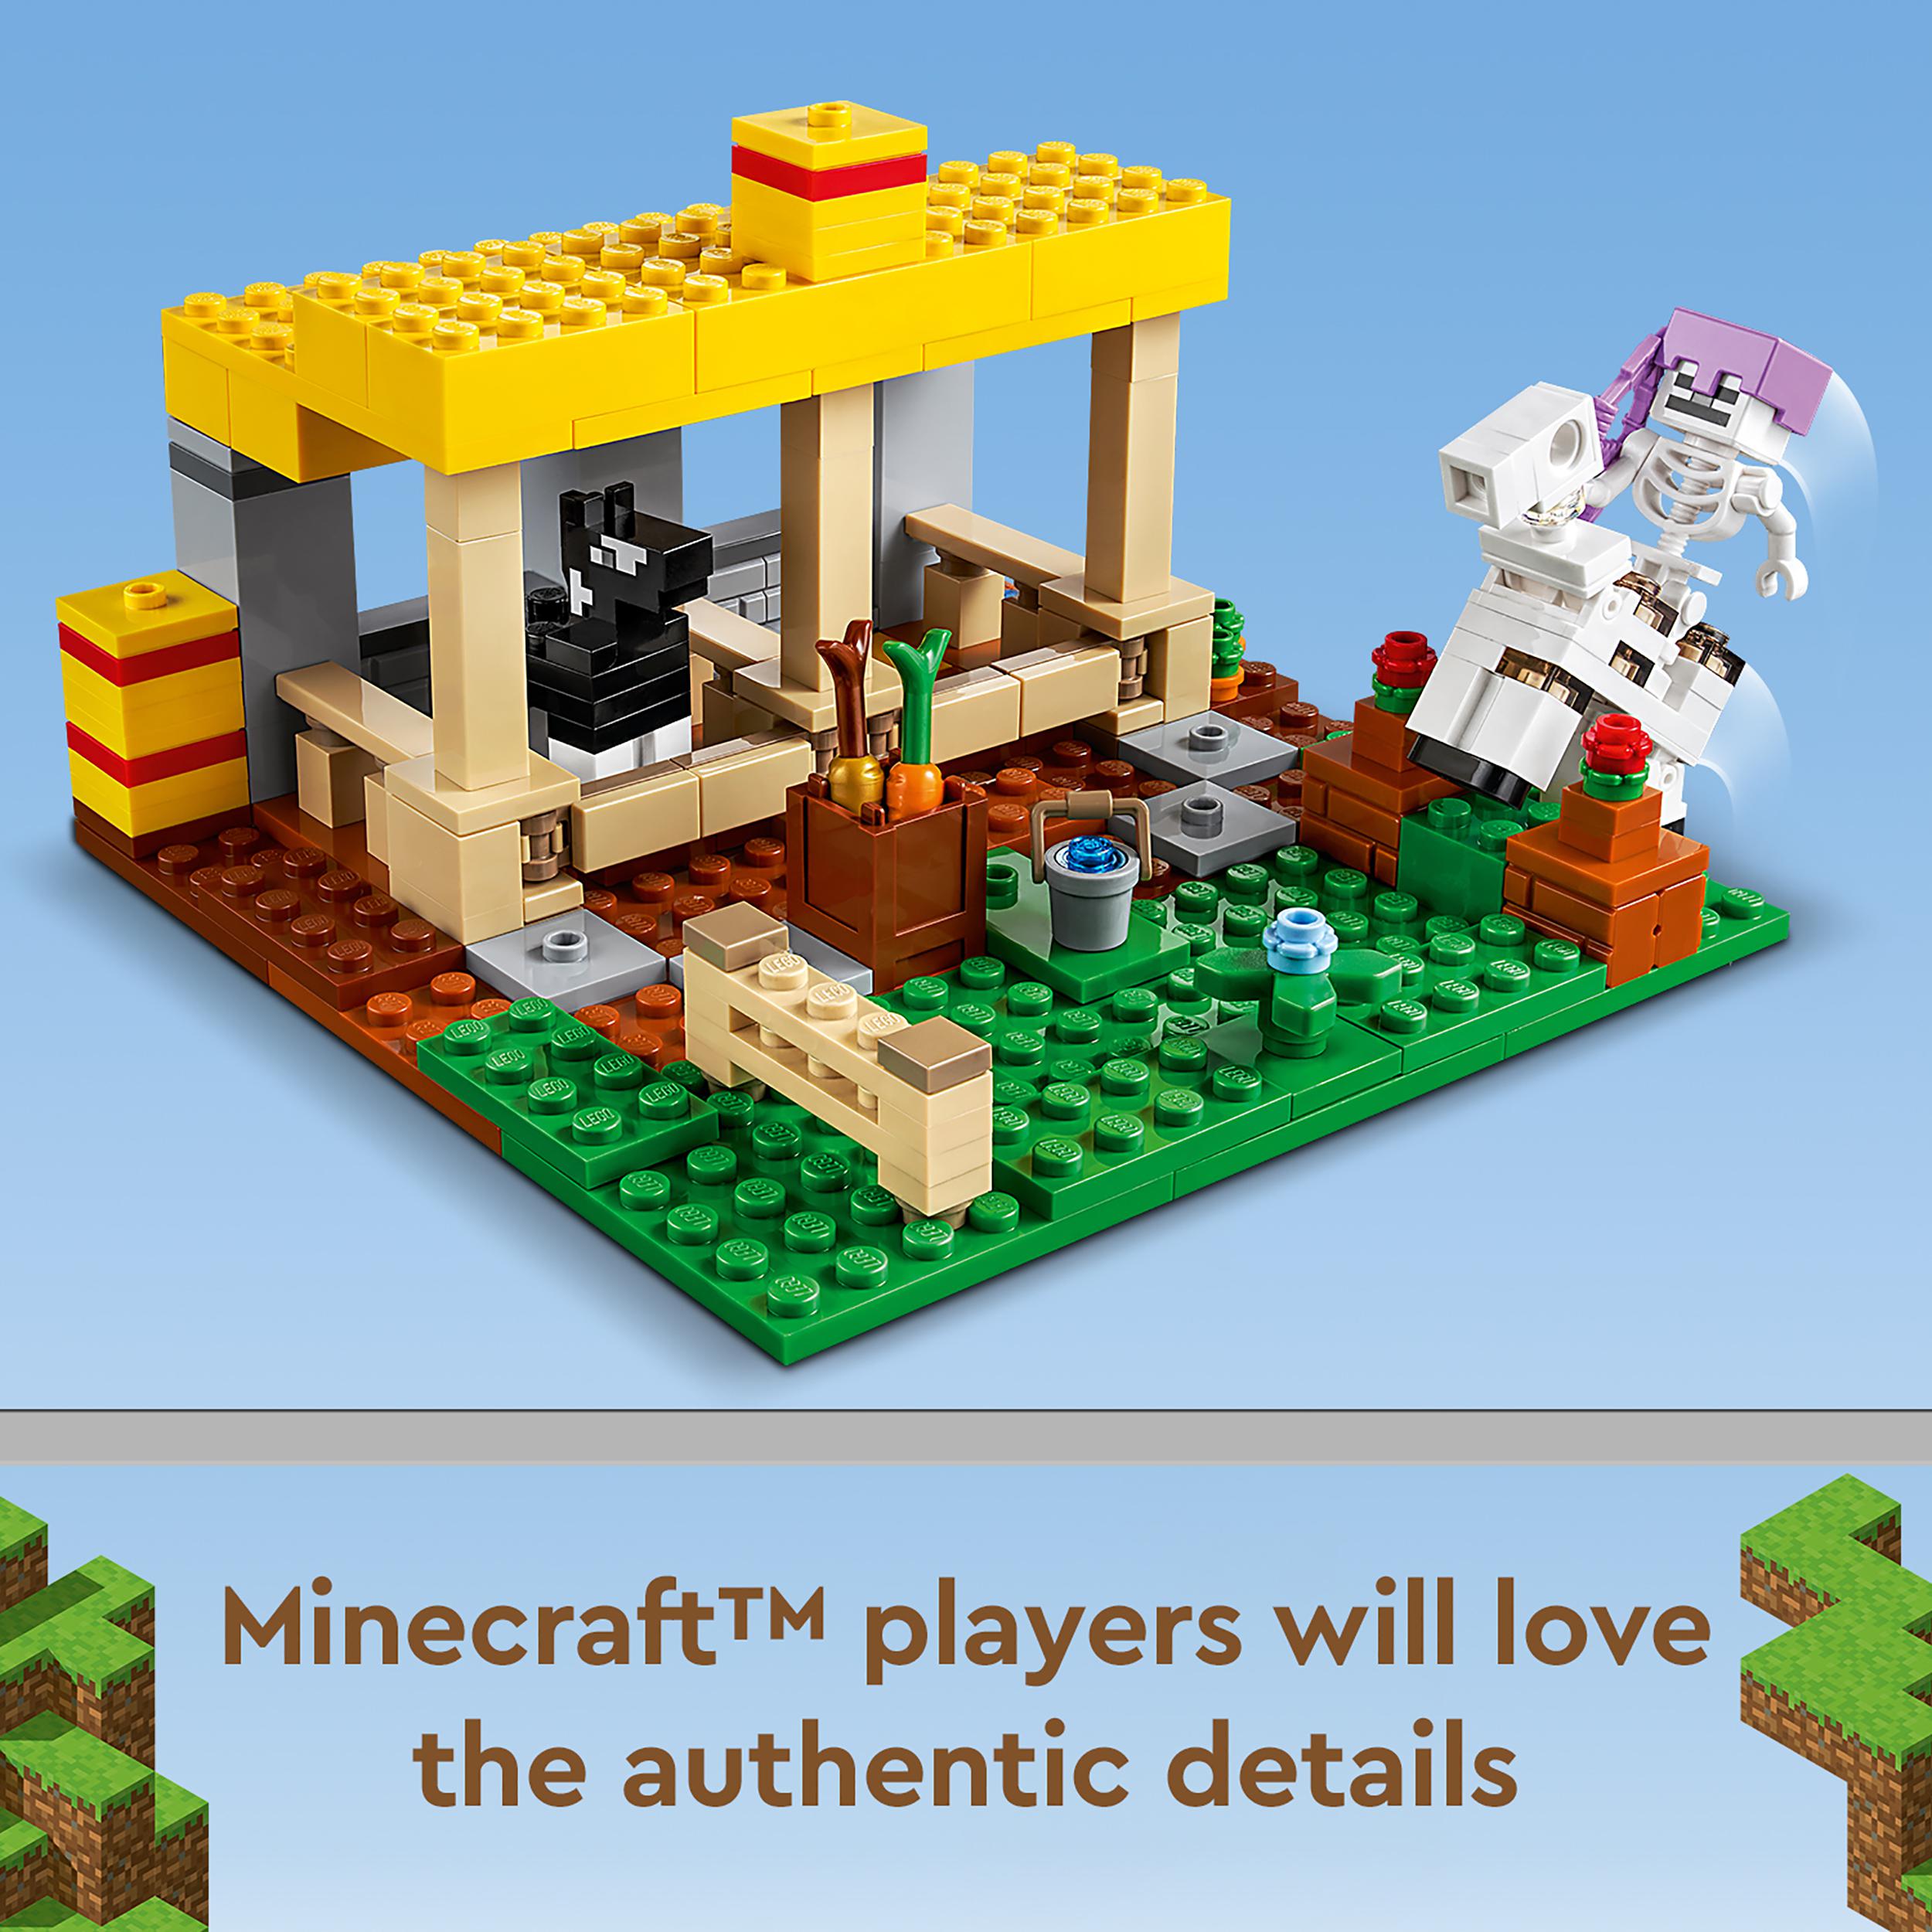 LEGO® Minecraft The Horse Stable Farm Toy 21171 Default Title